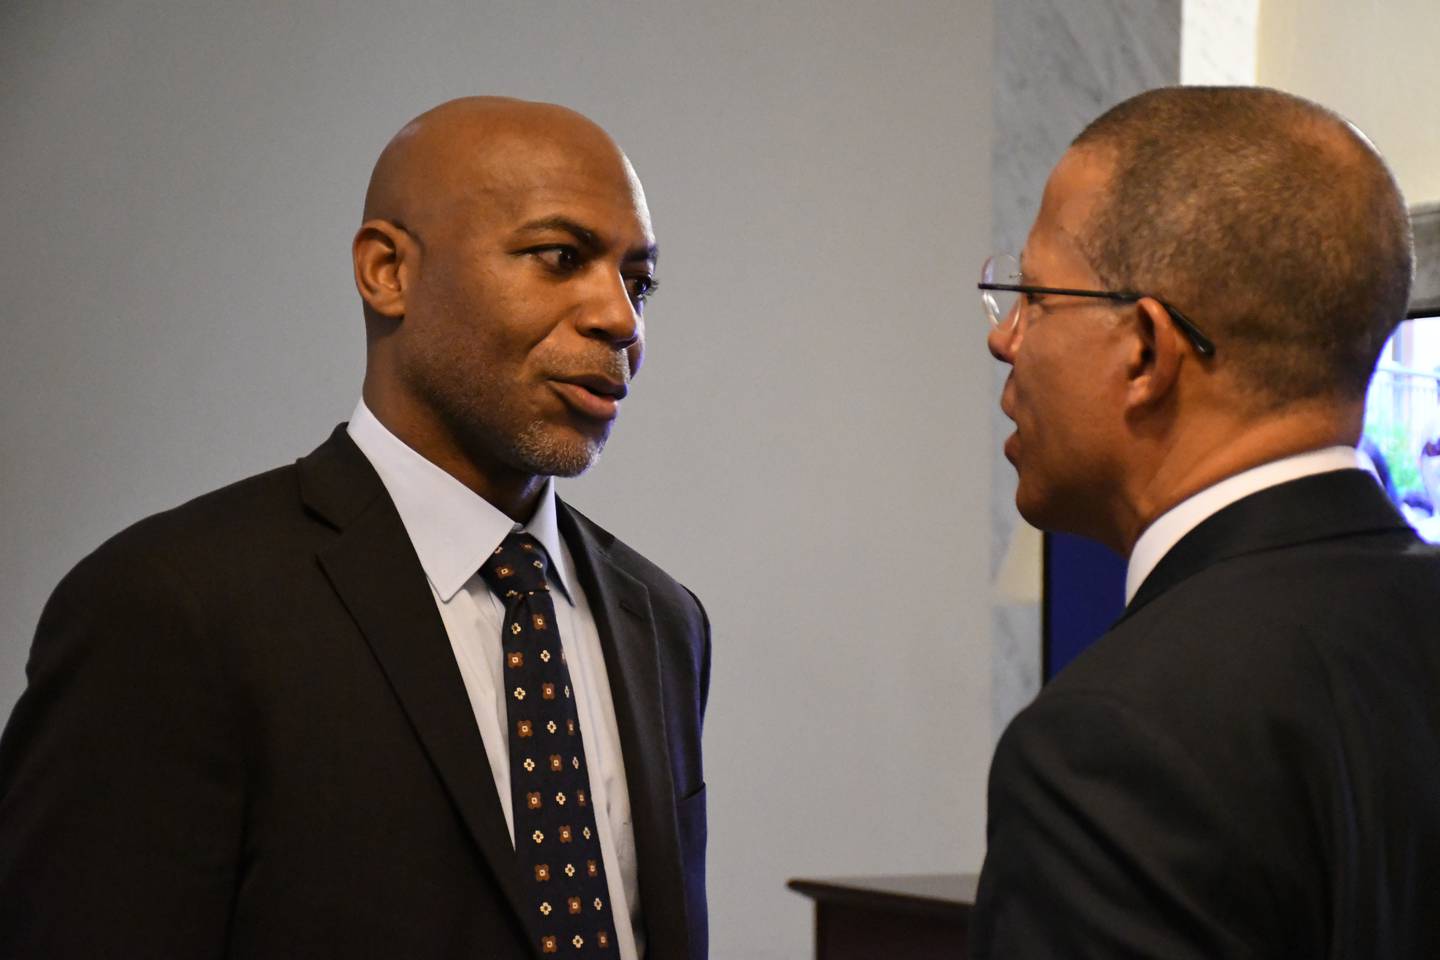 U.S. Attorney for the District of Maryland Erek Barron, left, and Maryland Attorney General Anthony Brown talk in the State House in Annapolis on Thursday, Jan. 19, 2023.